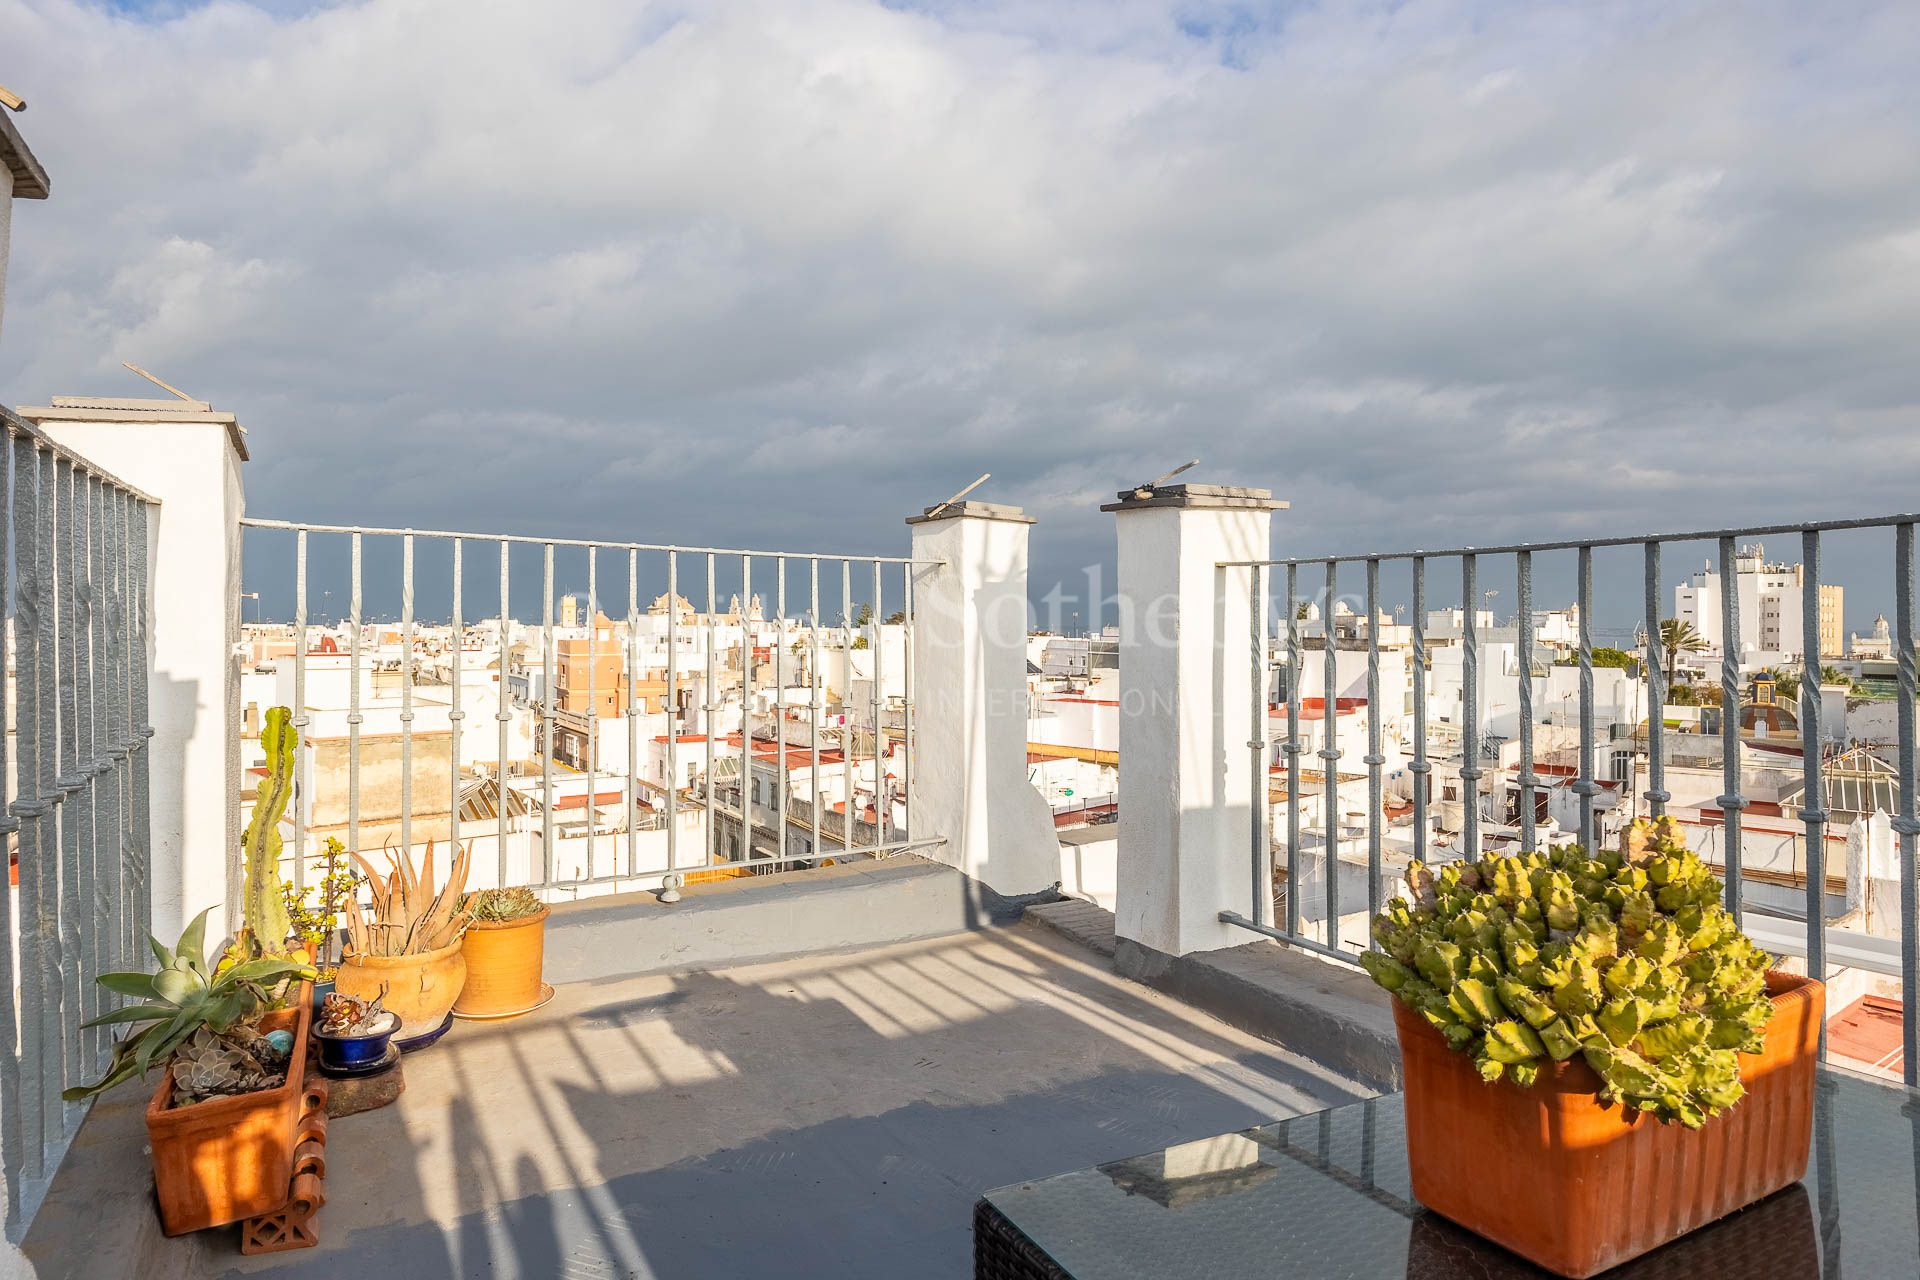 3-bedroom apartment with a 360º terrace